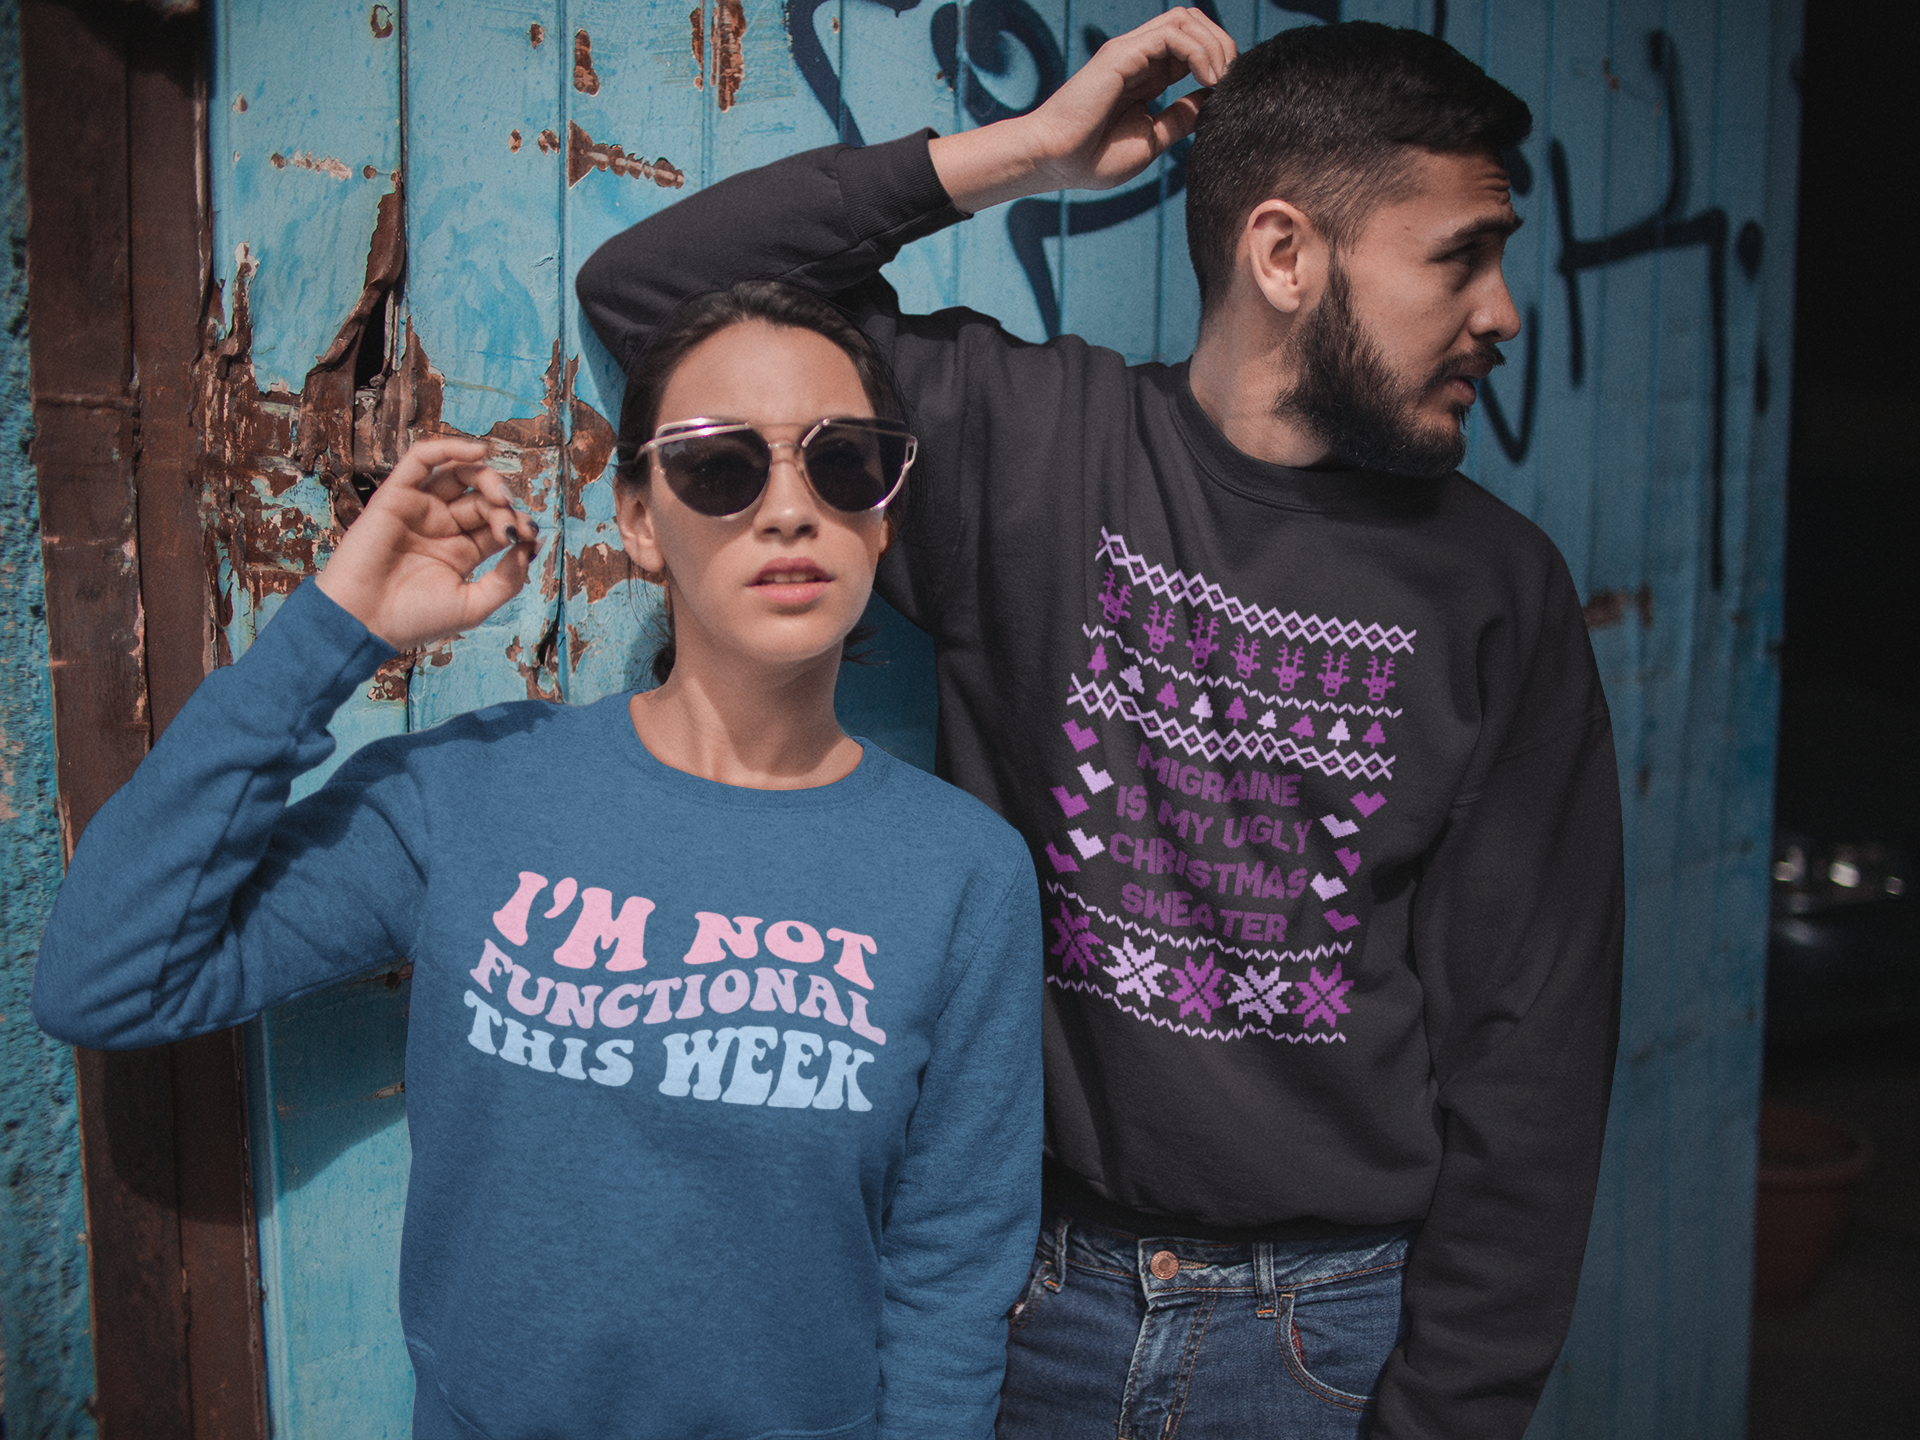 Woman wearing a blue green sweatshirt saying "I'm not functional this week" in a wavy pattern and a man wearing a black sweatshirt saying "Migraine is my ugly Christmas Sweater"